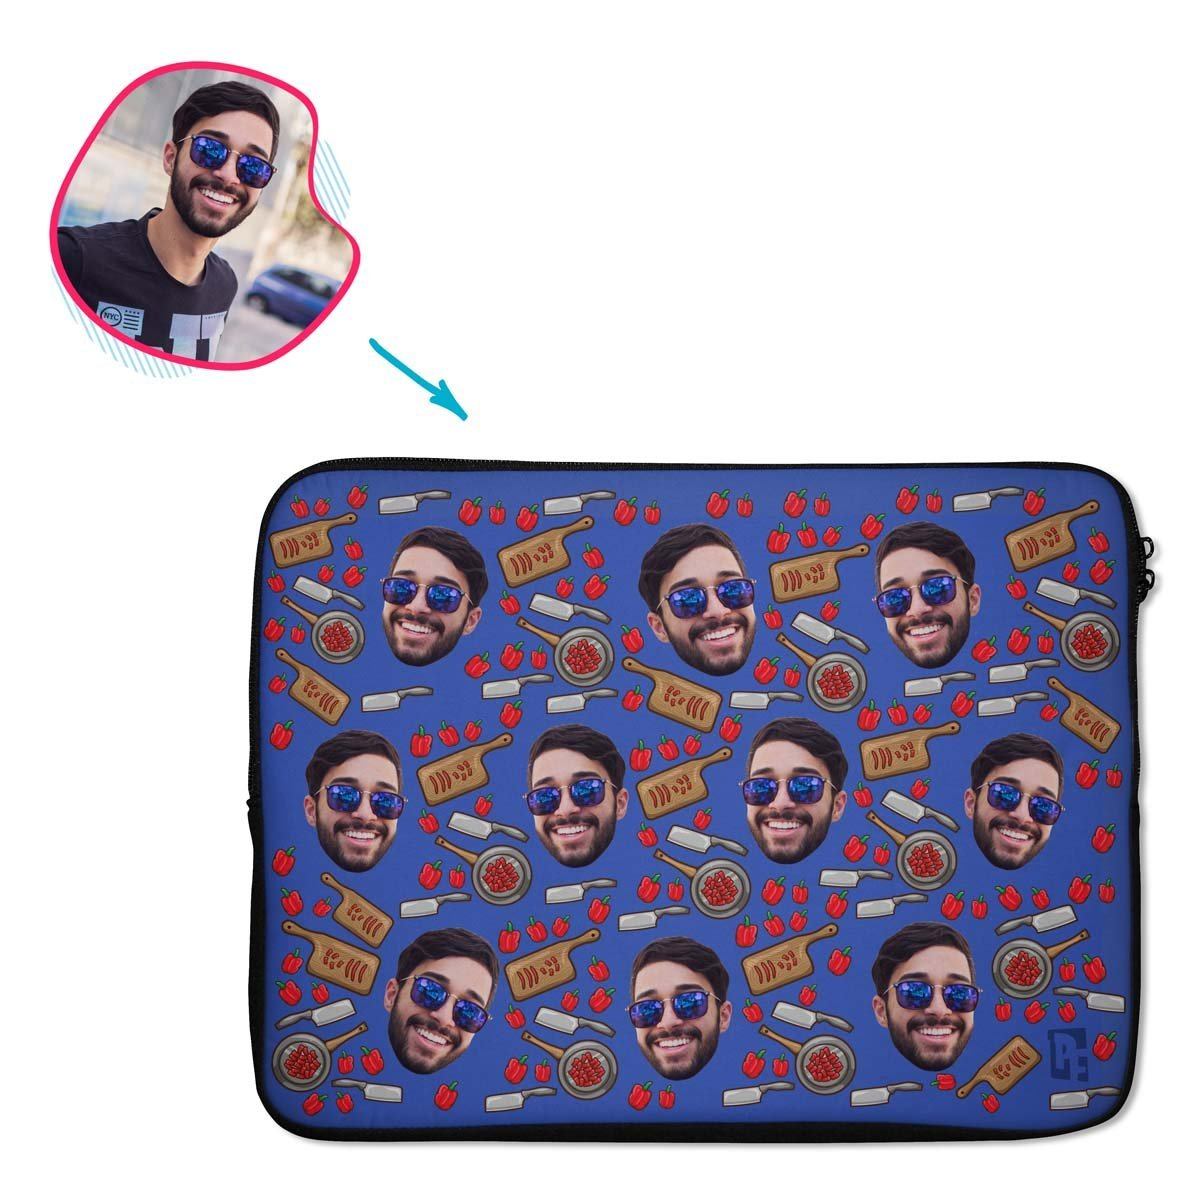 darkblue Сooking laptop sleeve personalized with photo of face printed on them